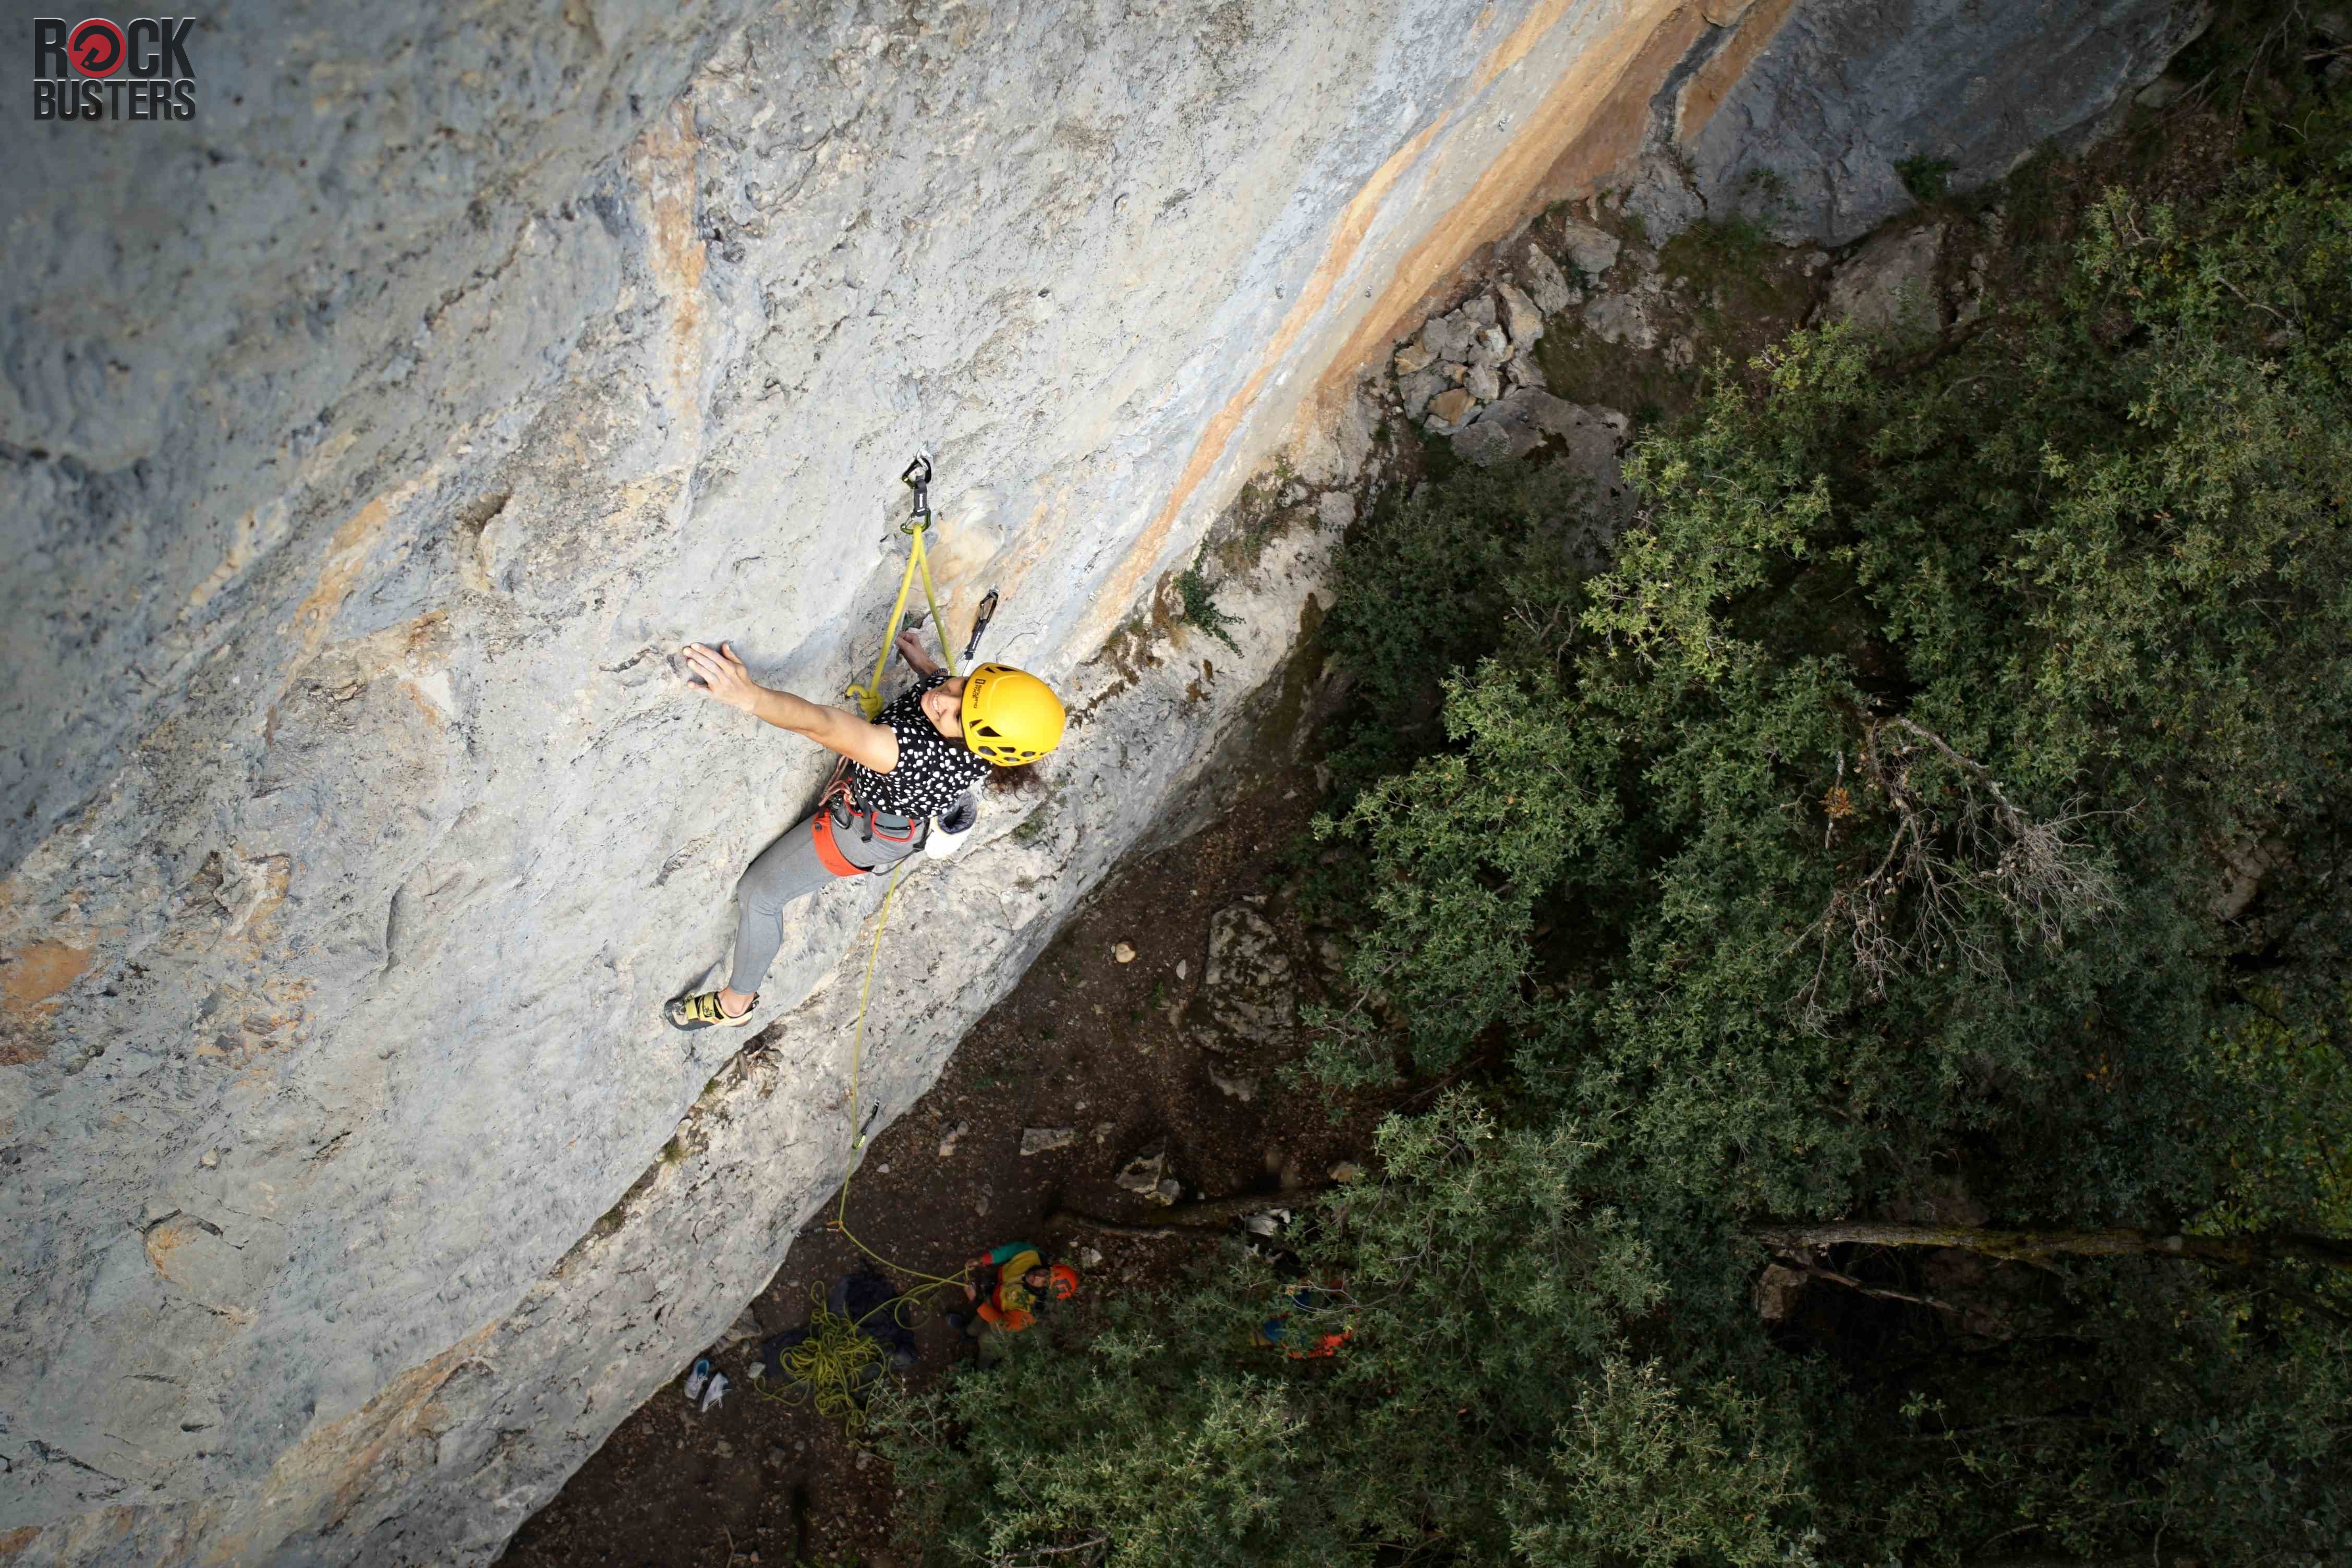 climber during the advanced sport climbing course with  Patxi Usobiaga